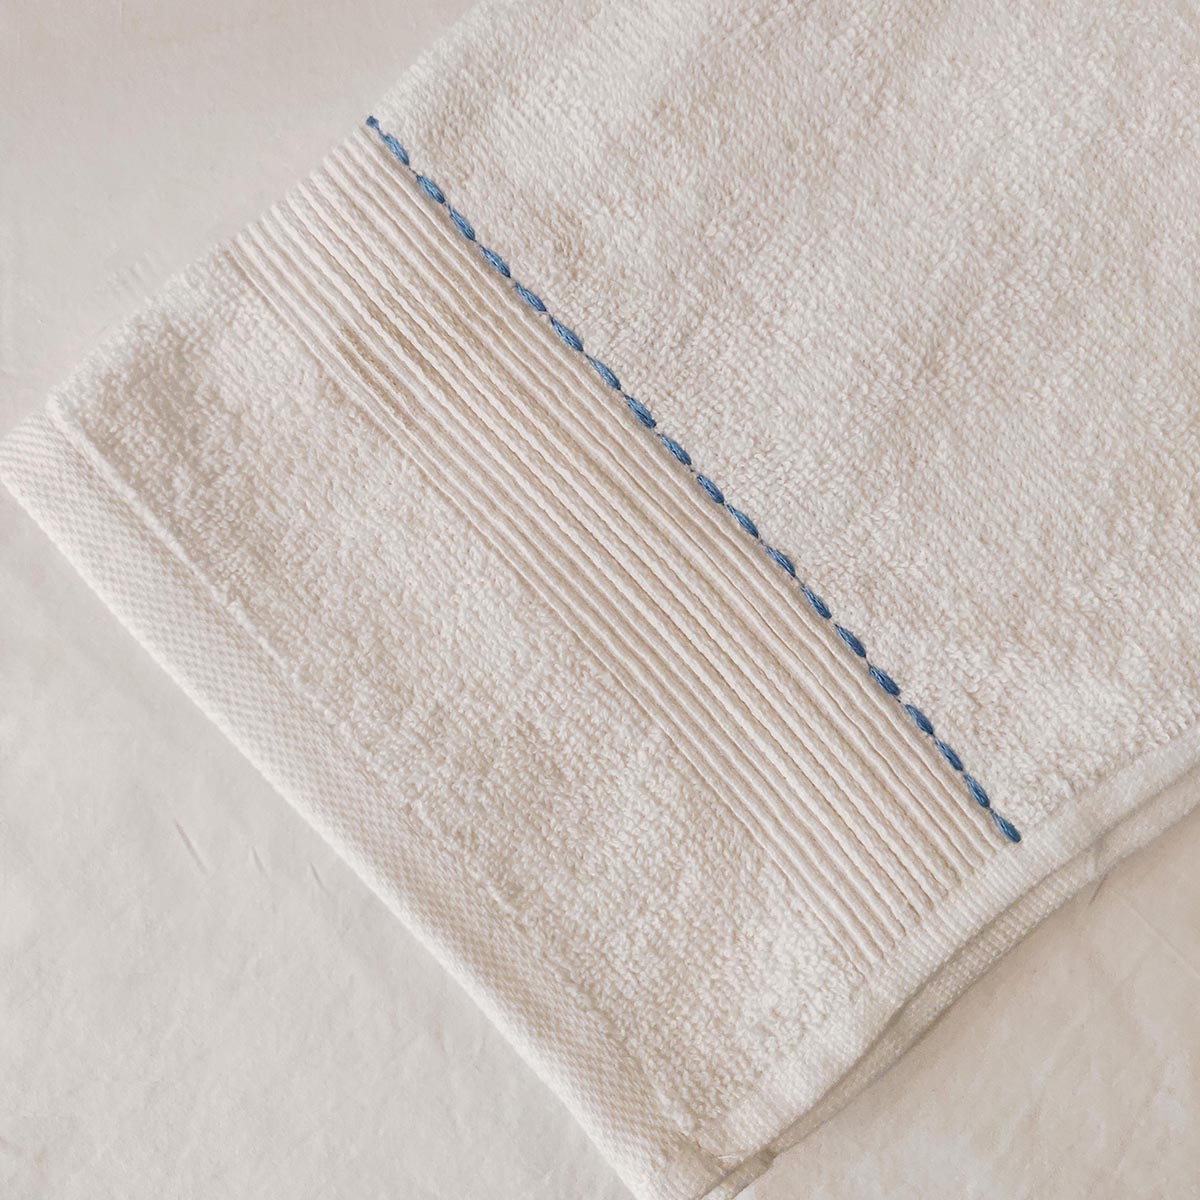 Swirl Embroidery white organic cotton Bath towels, sizes available